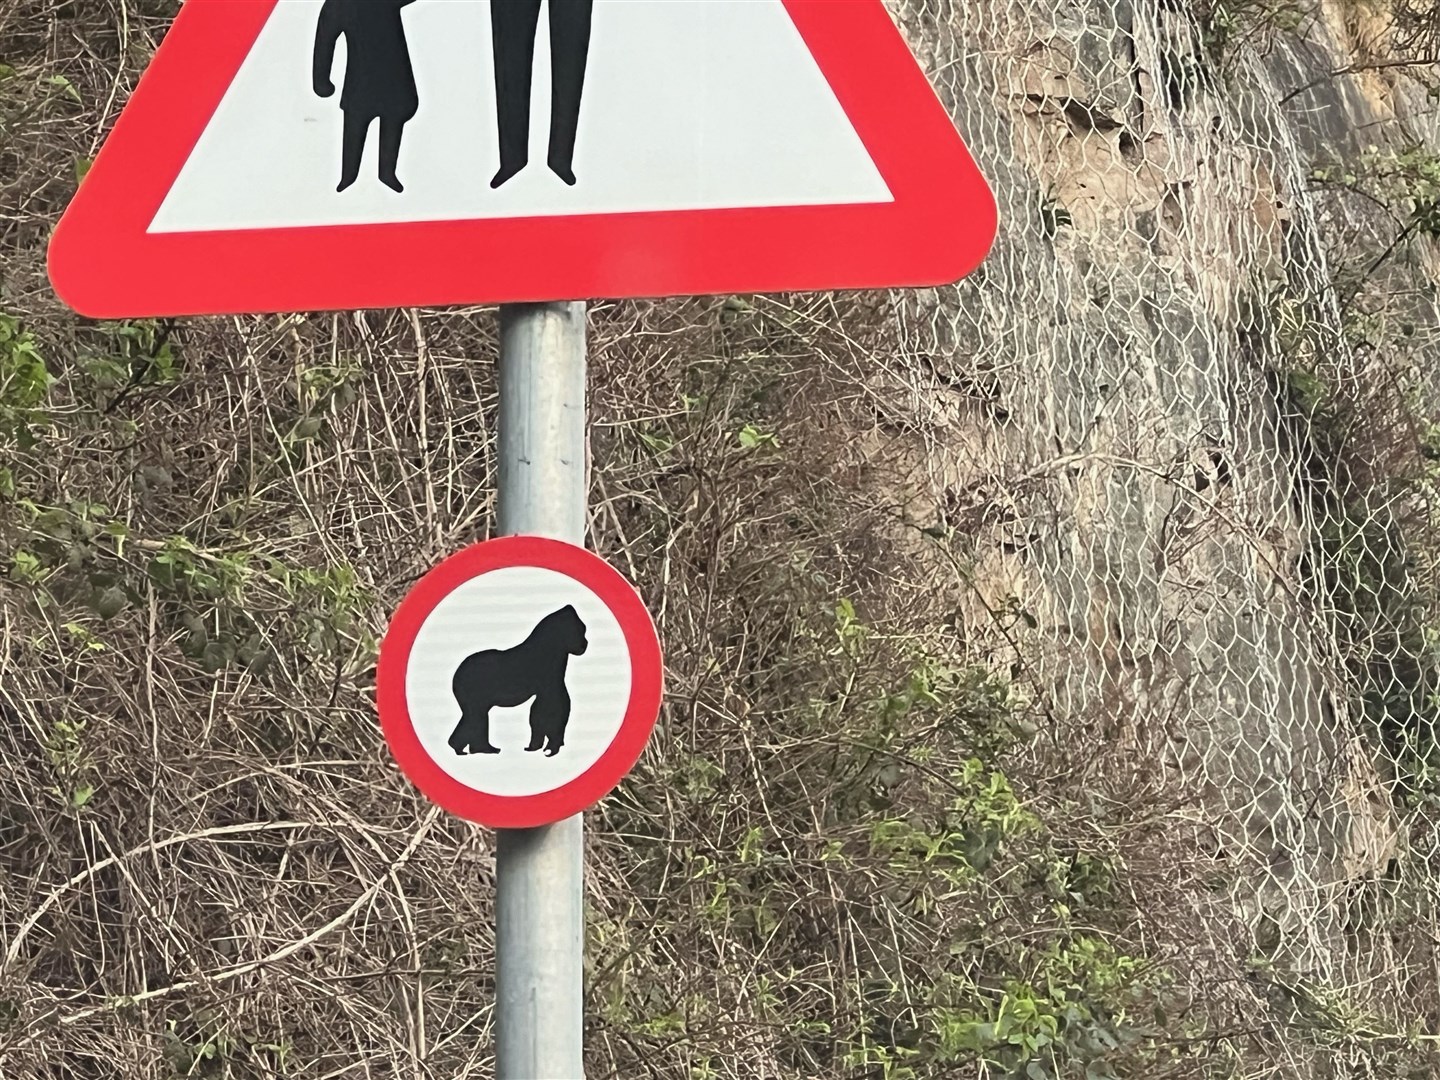 Gorilla crossing sign appears on A835 near Braes, just outside Ullapool.